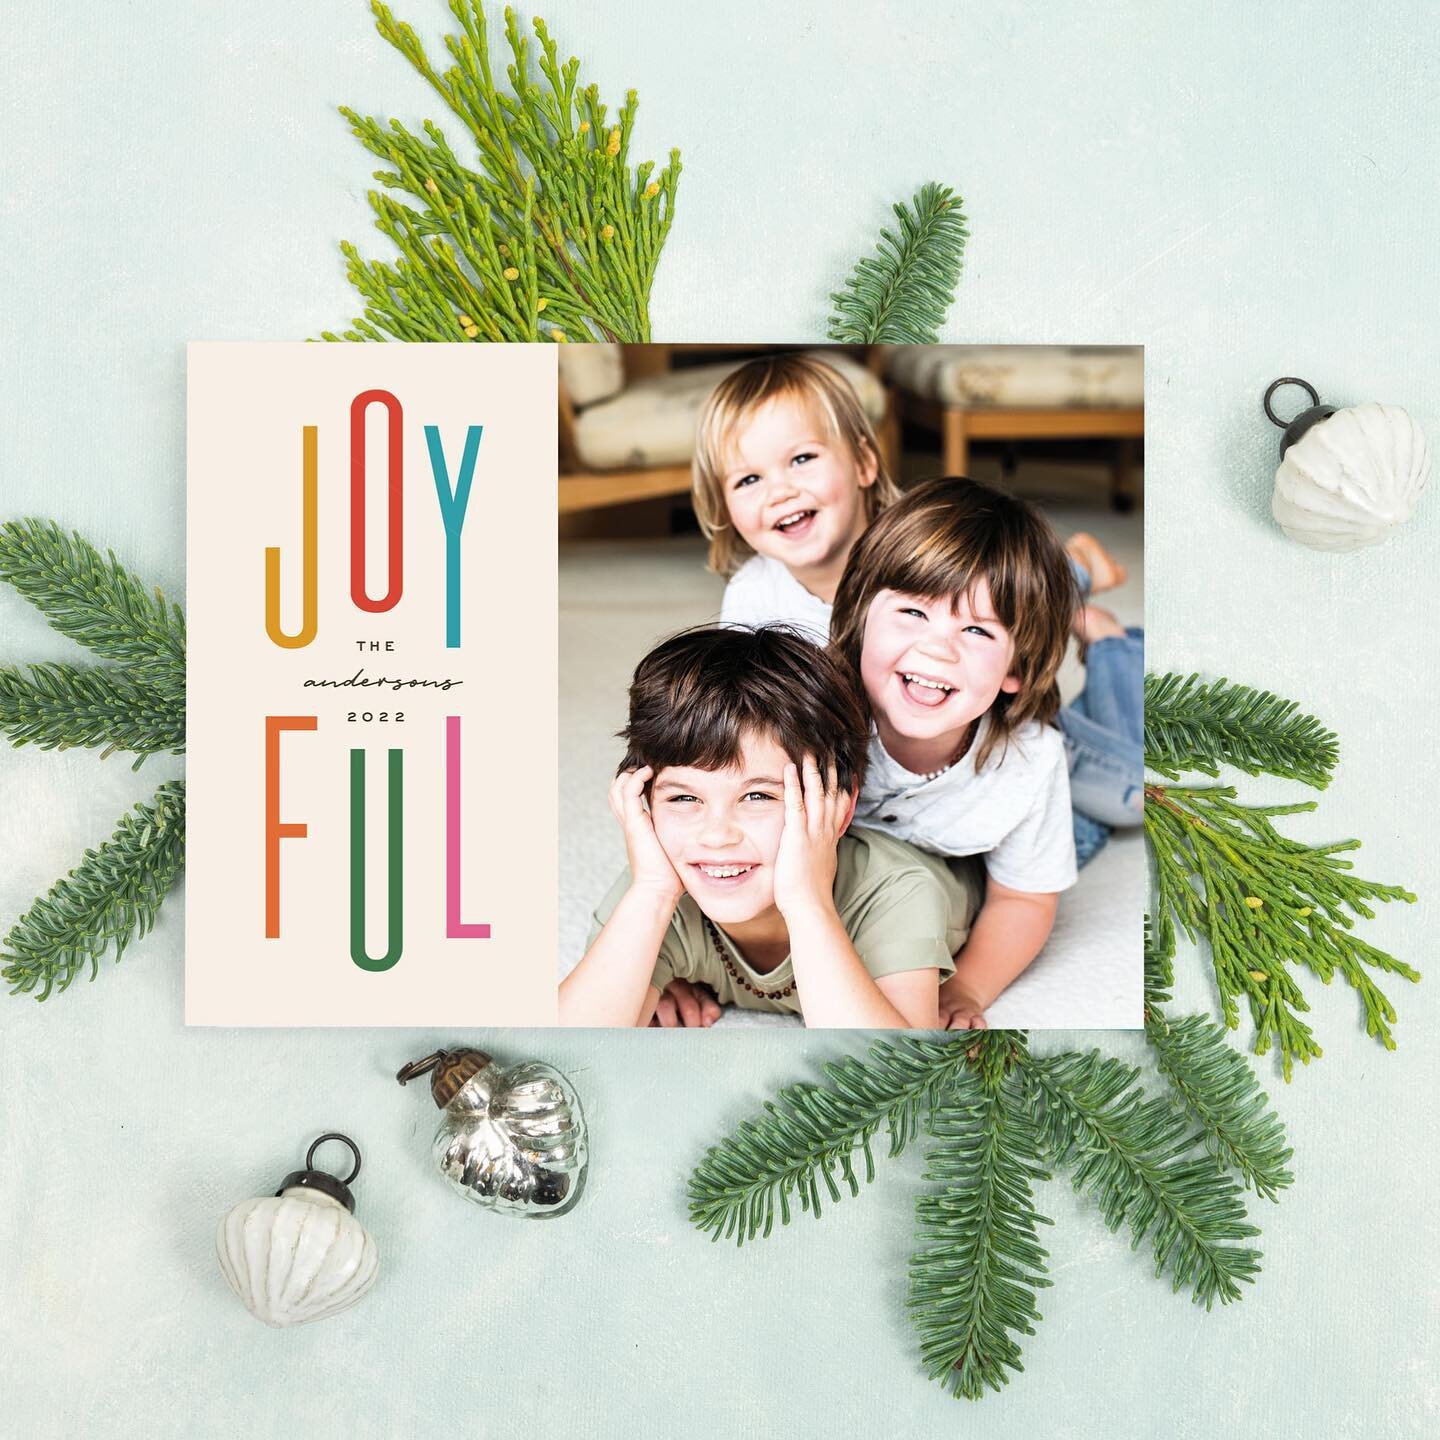 And just like that&hellip;Christmas is less than a month away! 😅

Thankfully there is still plenty of time to purchase holiday cards. &lsquo;Joyful Split&rsquo; is one of my favorites in my @minted collection this year! 🌈 ⛄️

Beautiful Flat lay moc